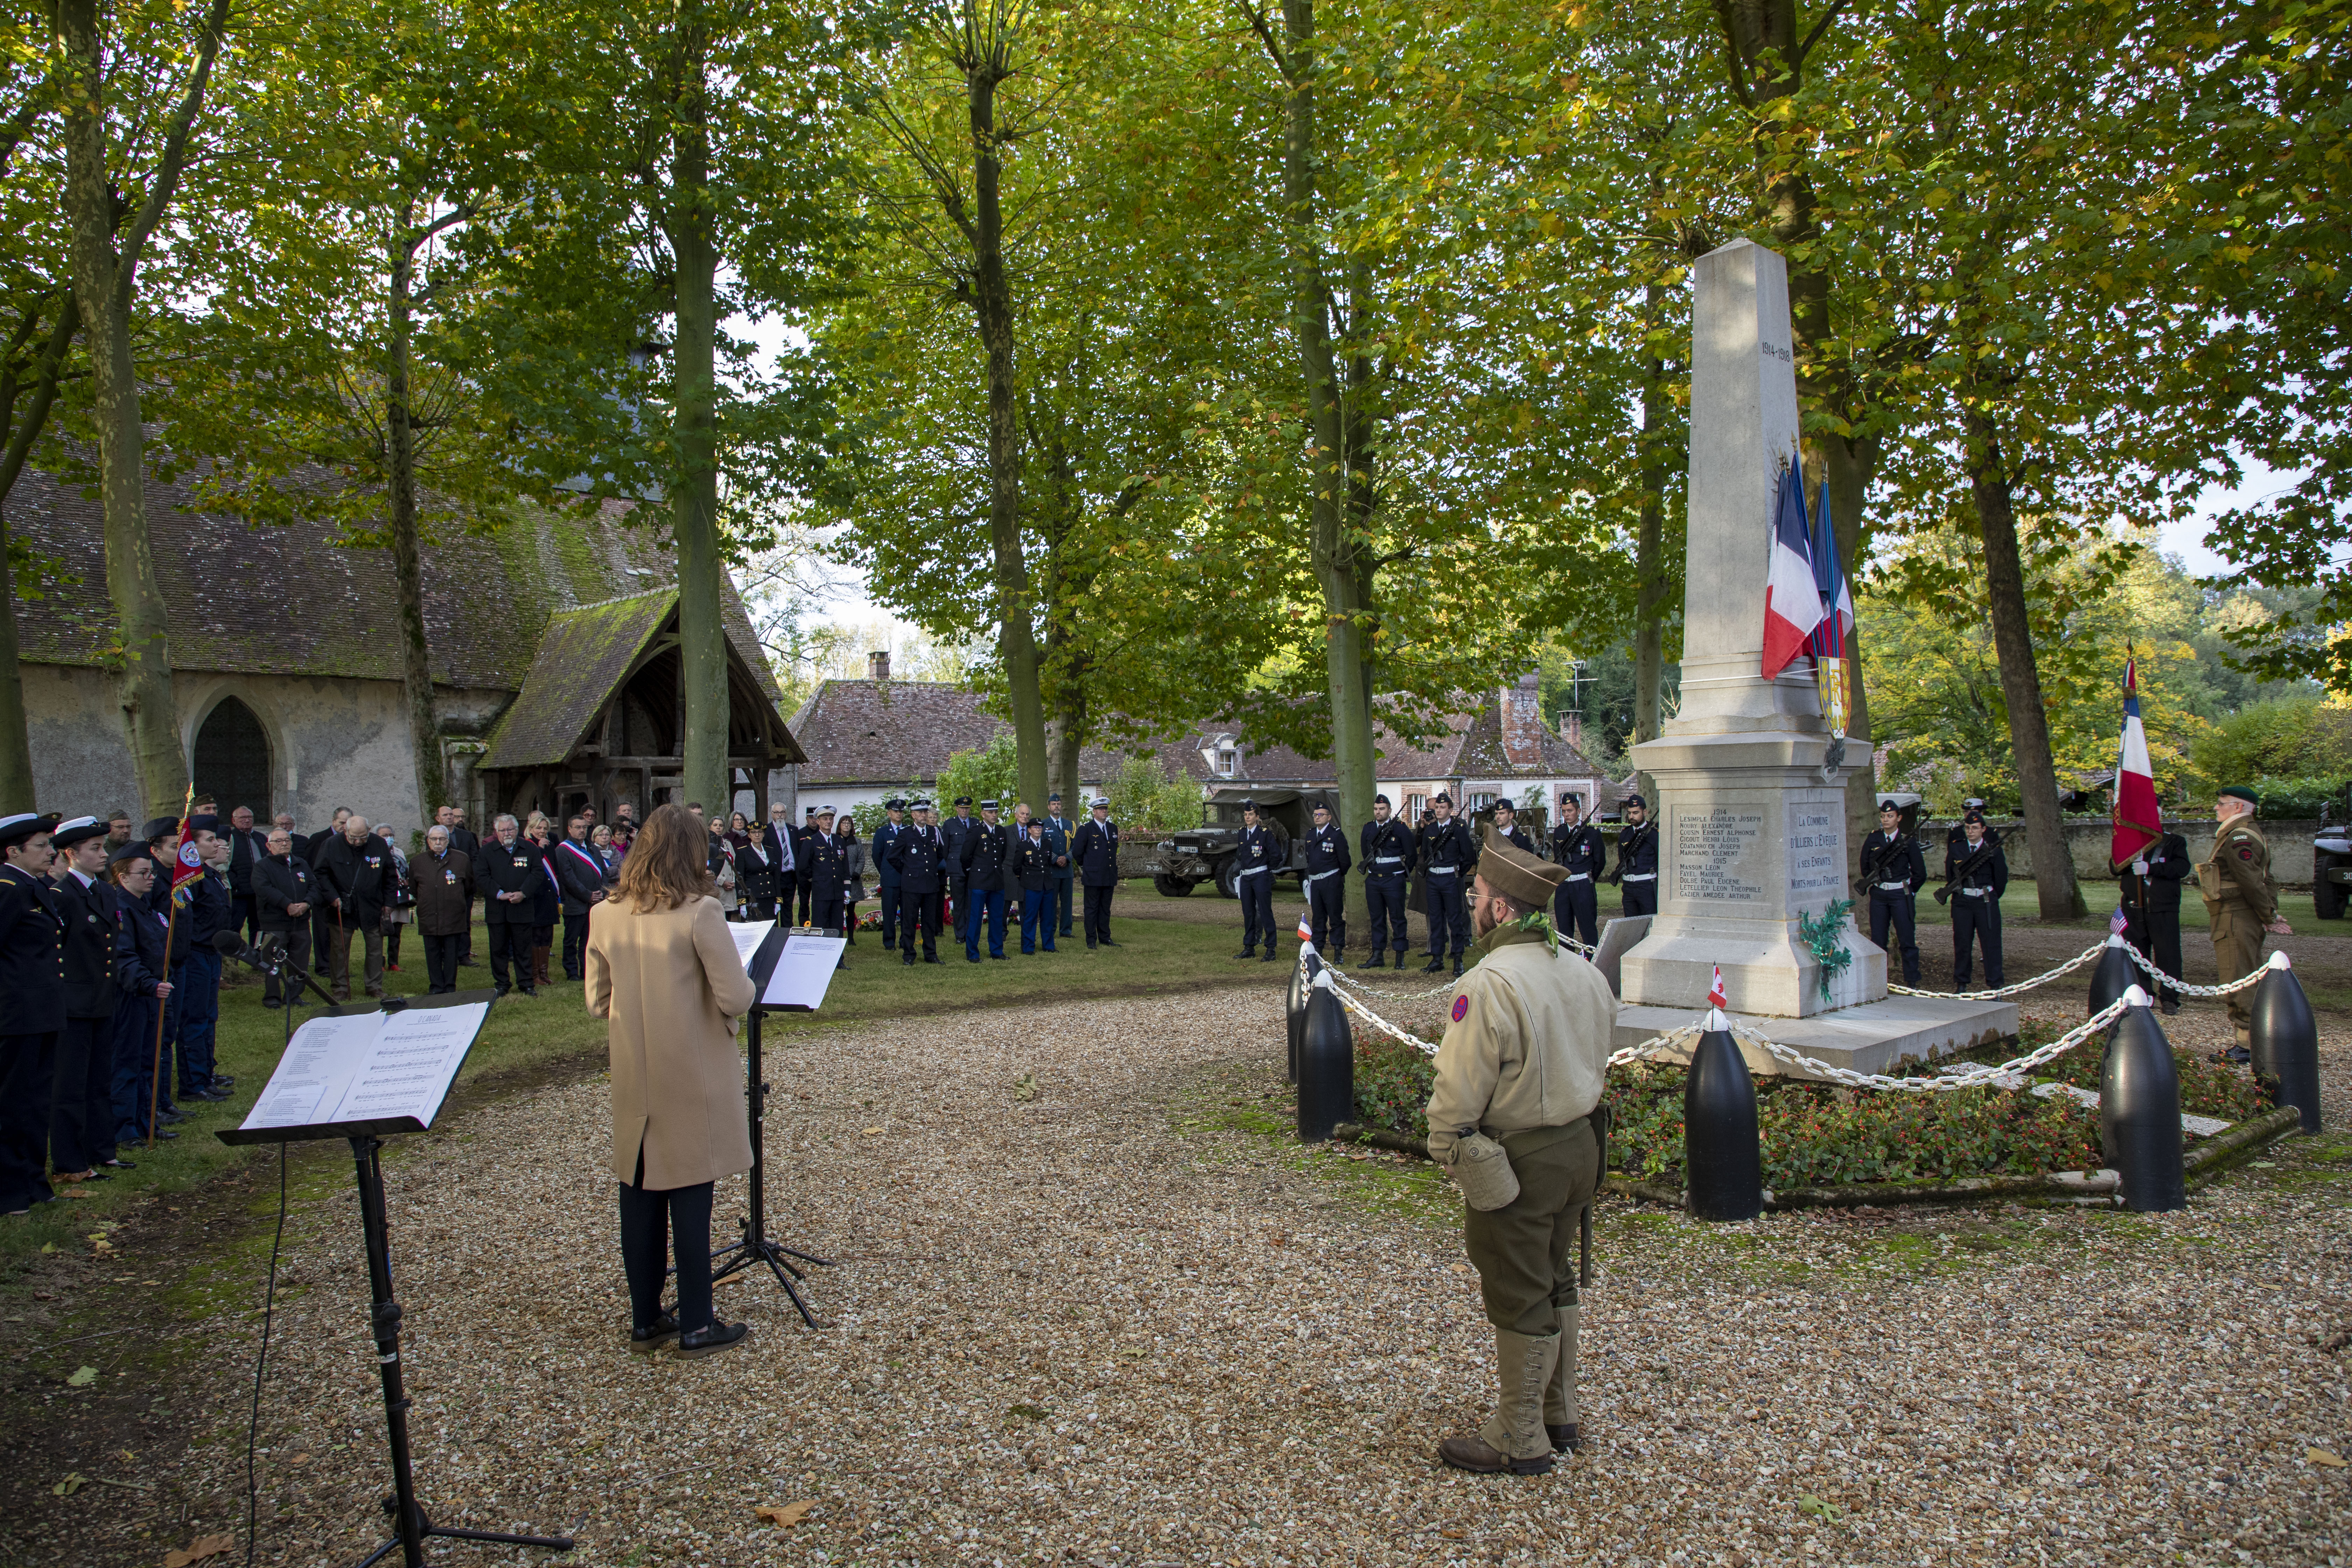 Personnel and attendants stand by memorial.